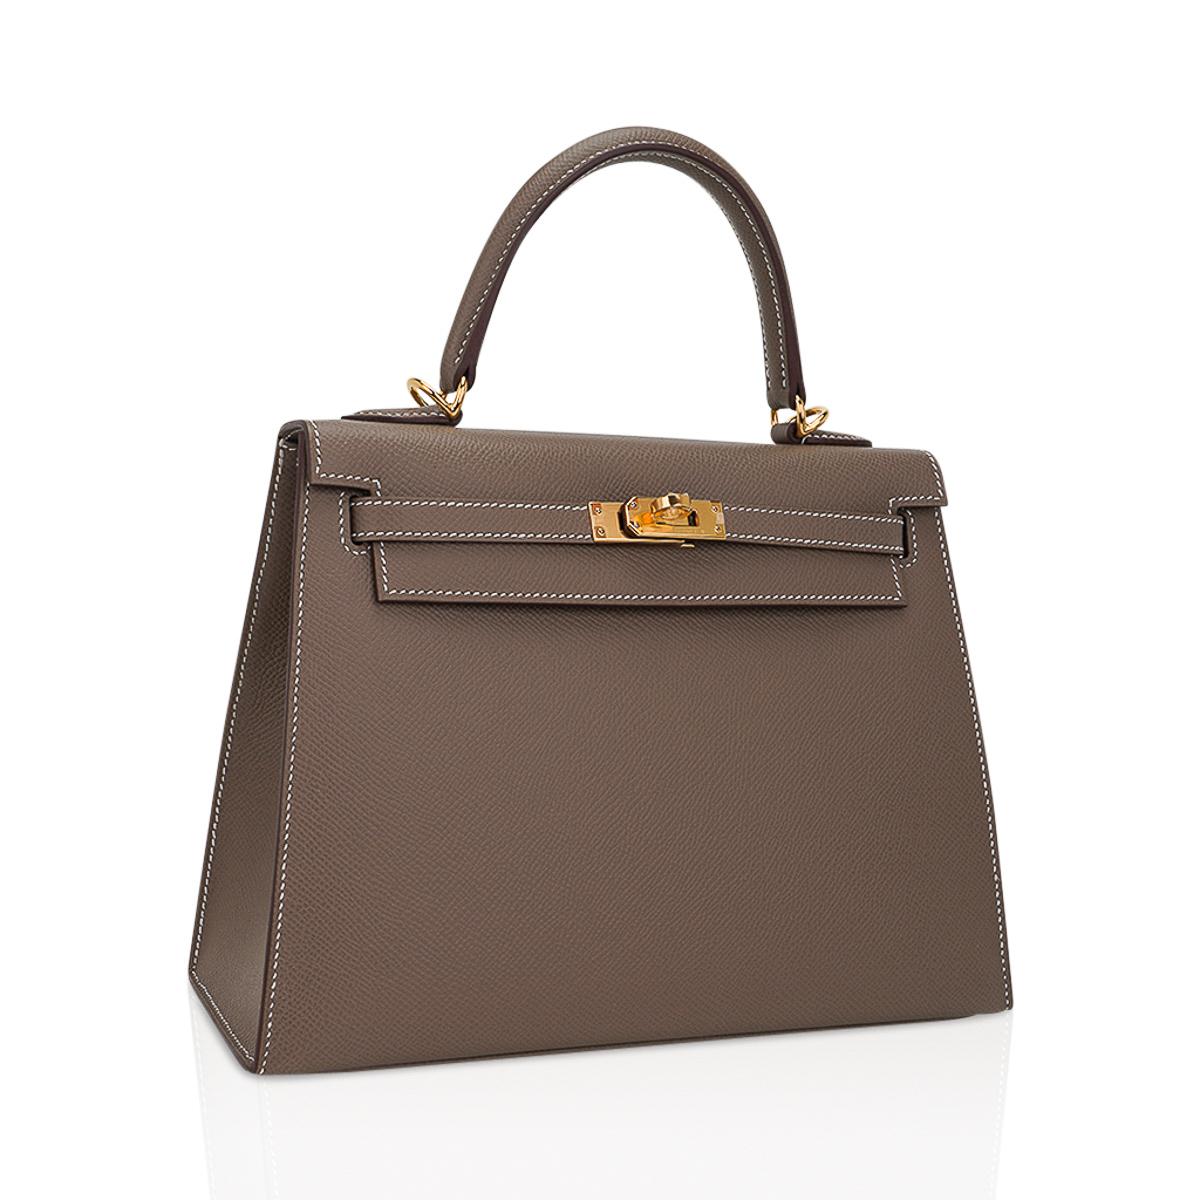 Mightychic offers an exquisite Hermes Kelly Sellier 25 bag featured in neutral perfection Etoupe.
Accentuated with bone topstitch detail.
Refined with gold hardware and Epsom leather.
Comes with signature Hermes box, raincoat, shoulder strap,